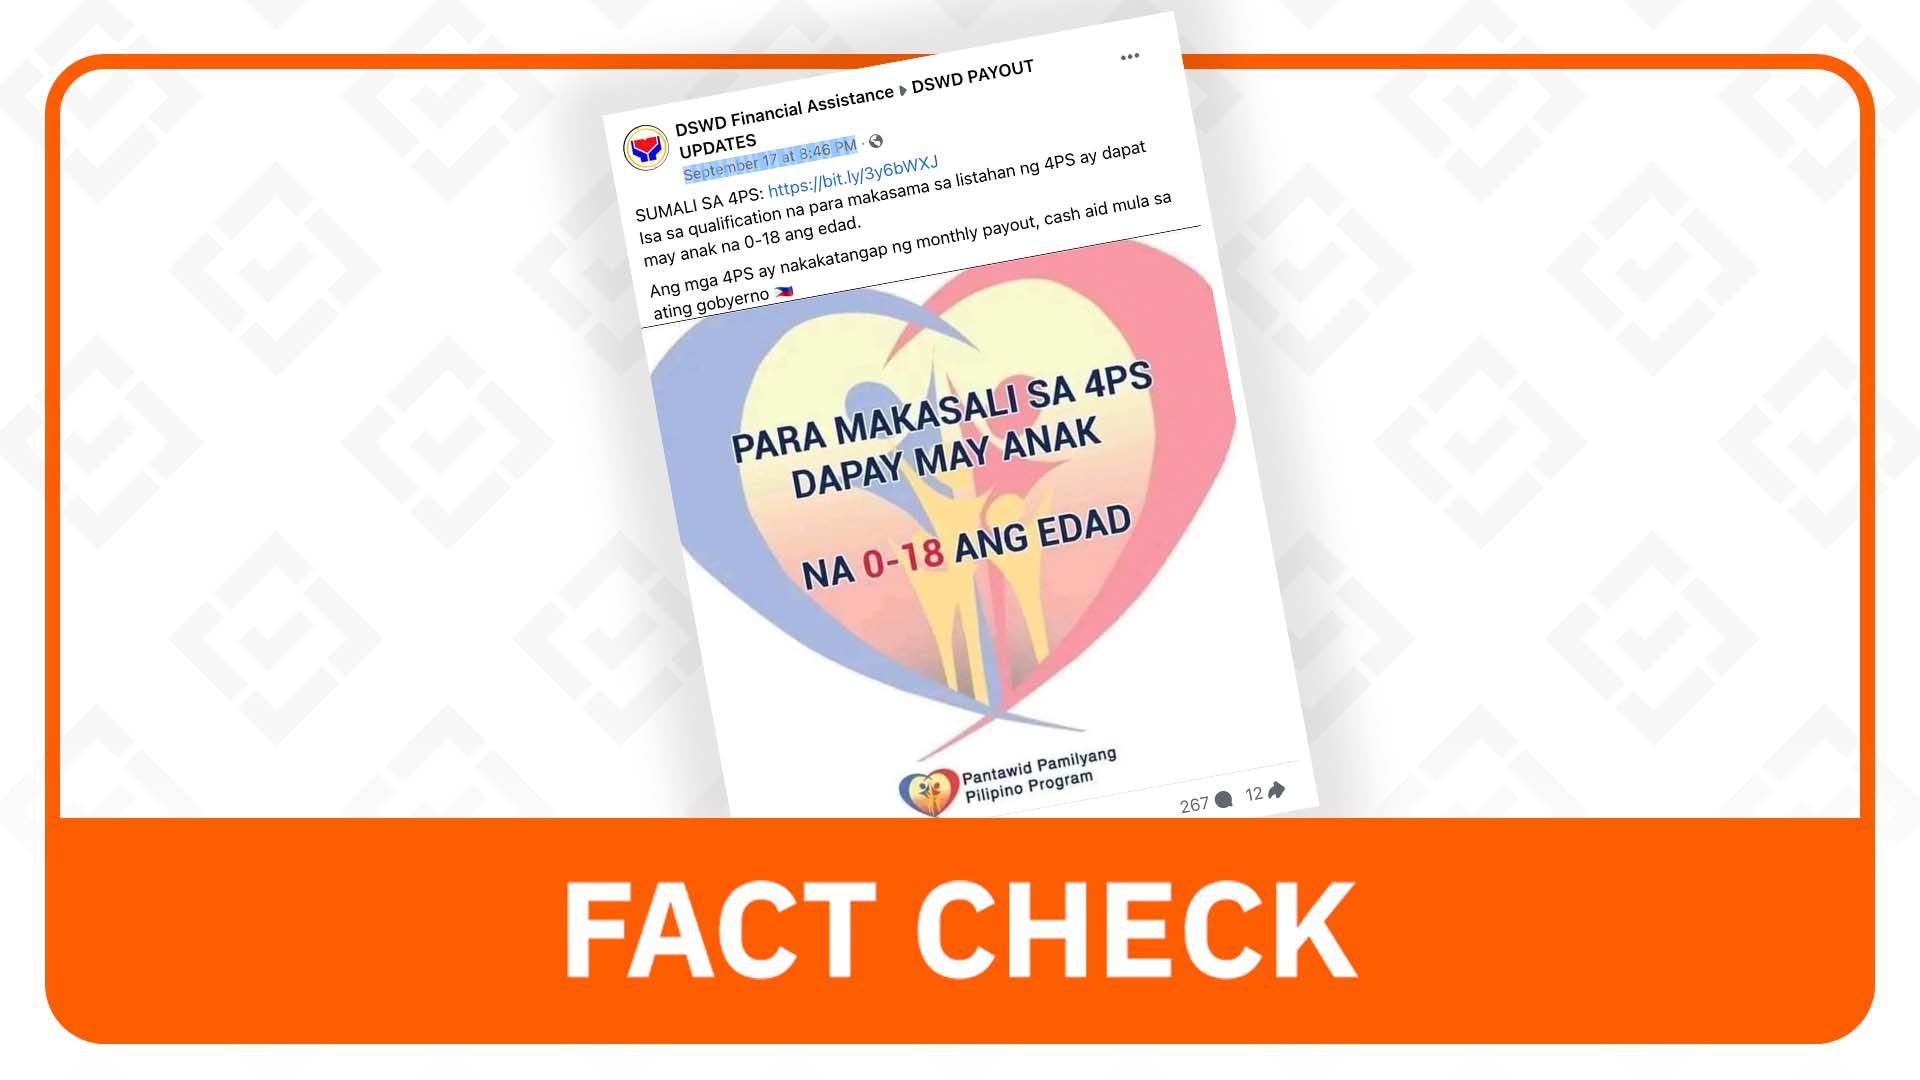 FACT CHECK: Online link for 4Ps registration is fake